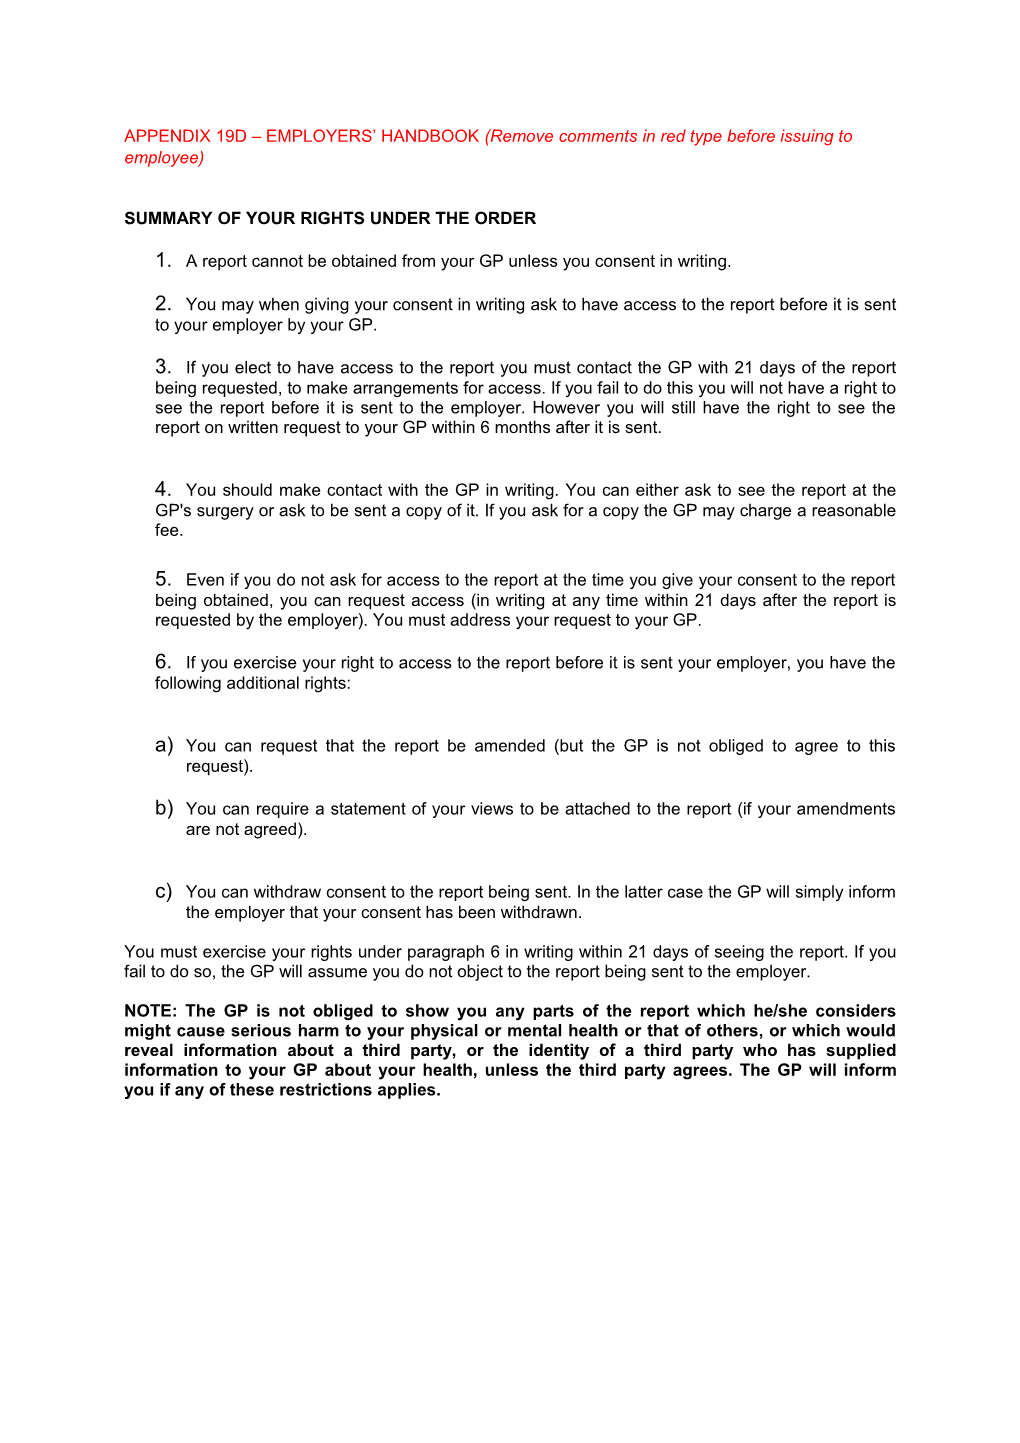 APPENDIX 19D EMPLOYERS HANDBOOK (Remove Comments in Red Type Before Issuing to Employee)